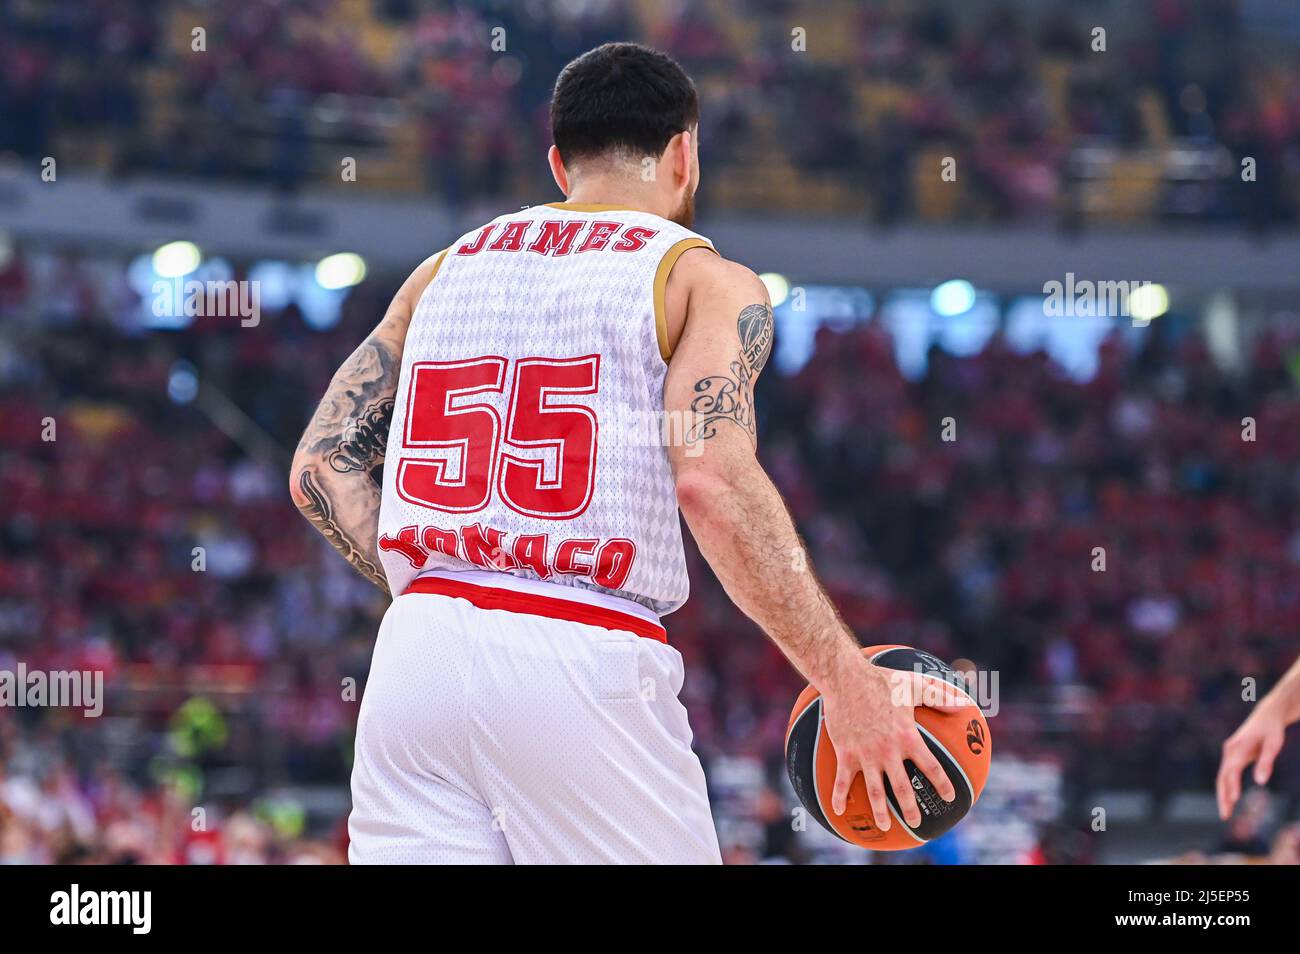 Mike James: From Omegna to Olimpia Milan - Eurohoops